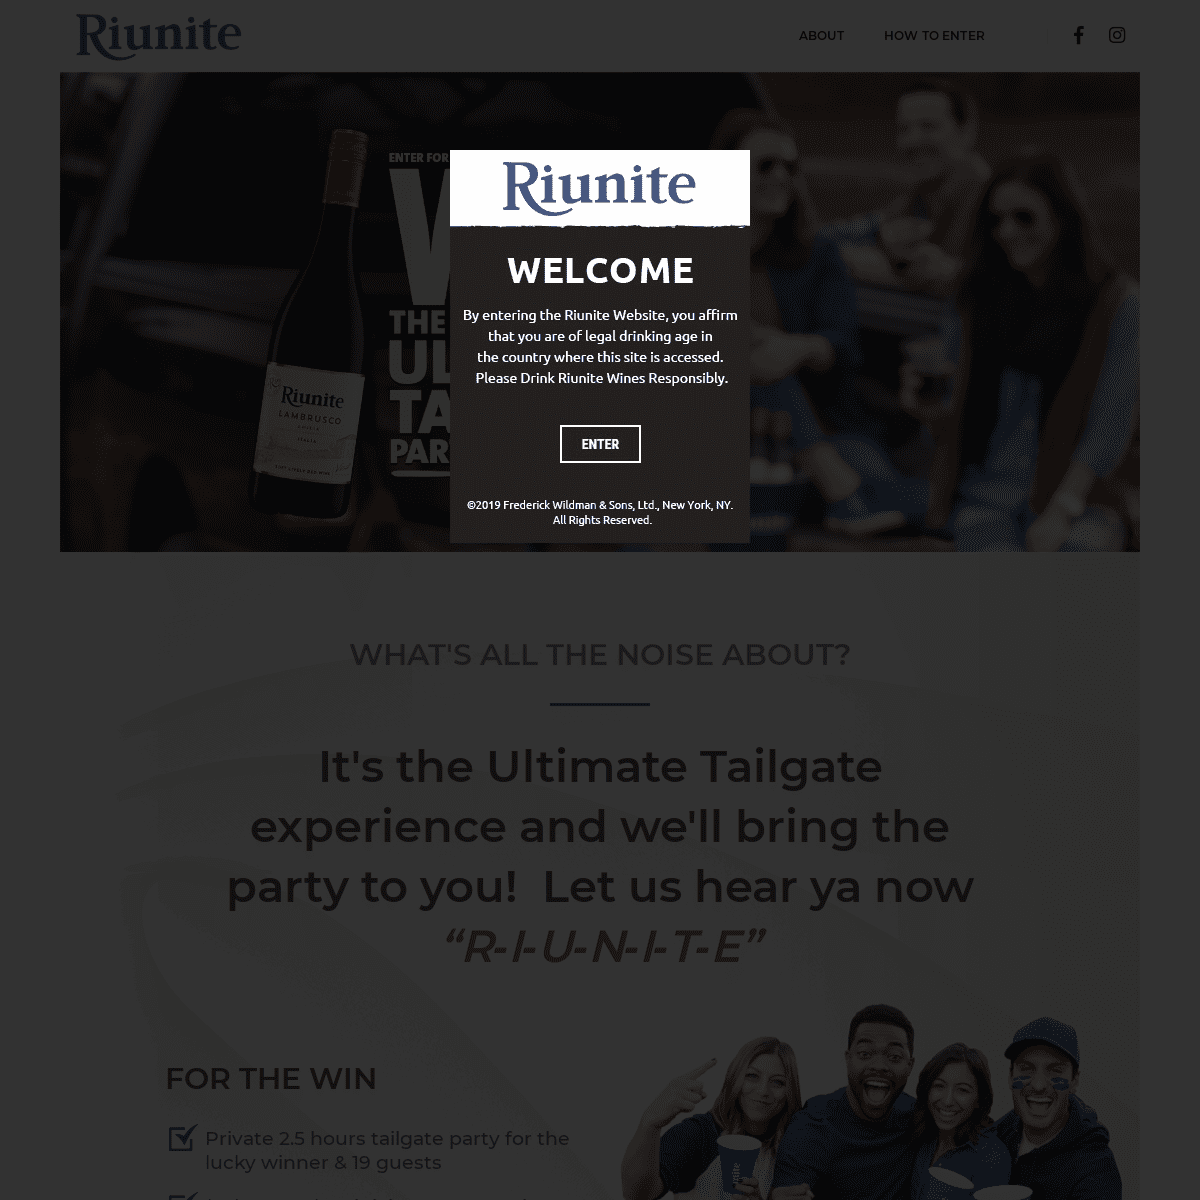 A complete backup of riunitetailgate.com